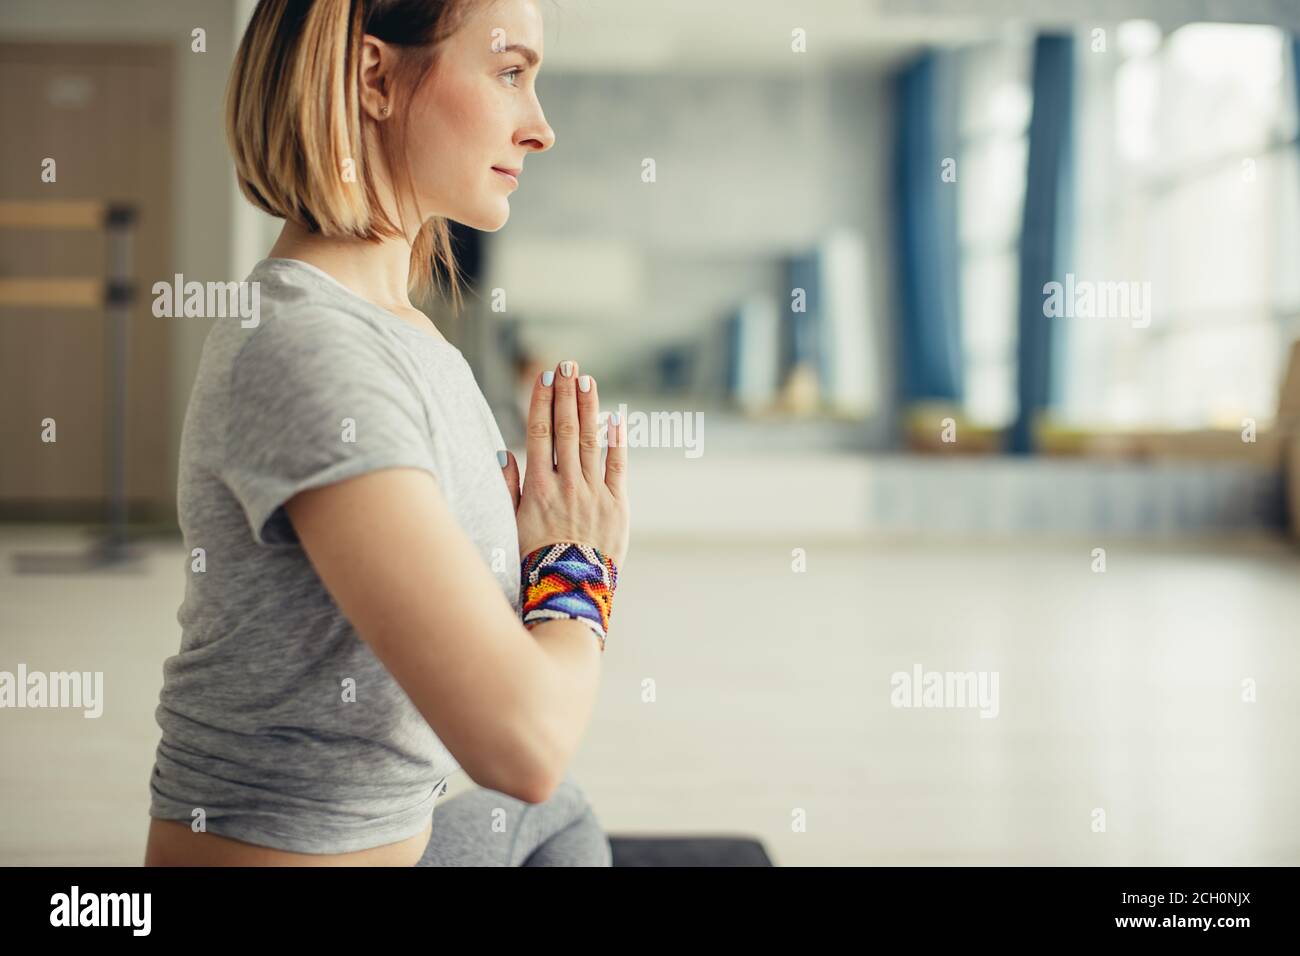 Practicing yoga sitting in padmasana. Young woman in lotus pose doing breathing exercise on mat at sport club interior, copy space Stock Photo